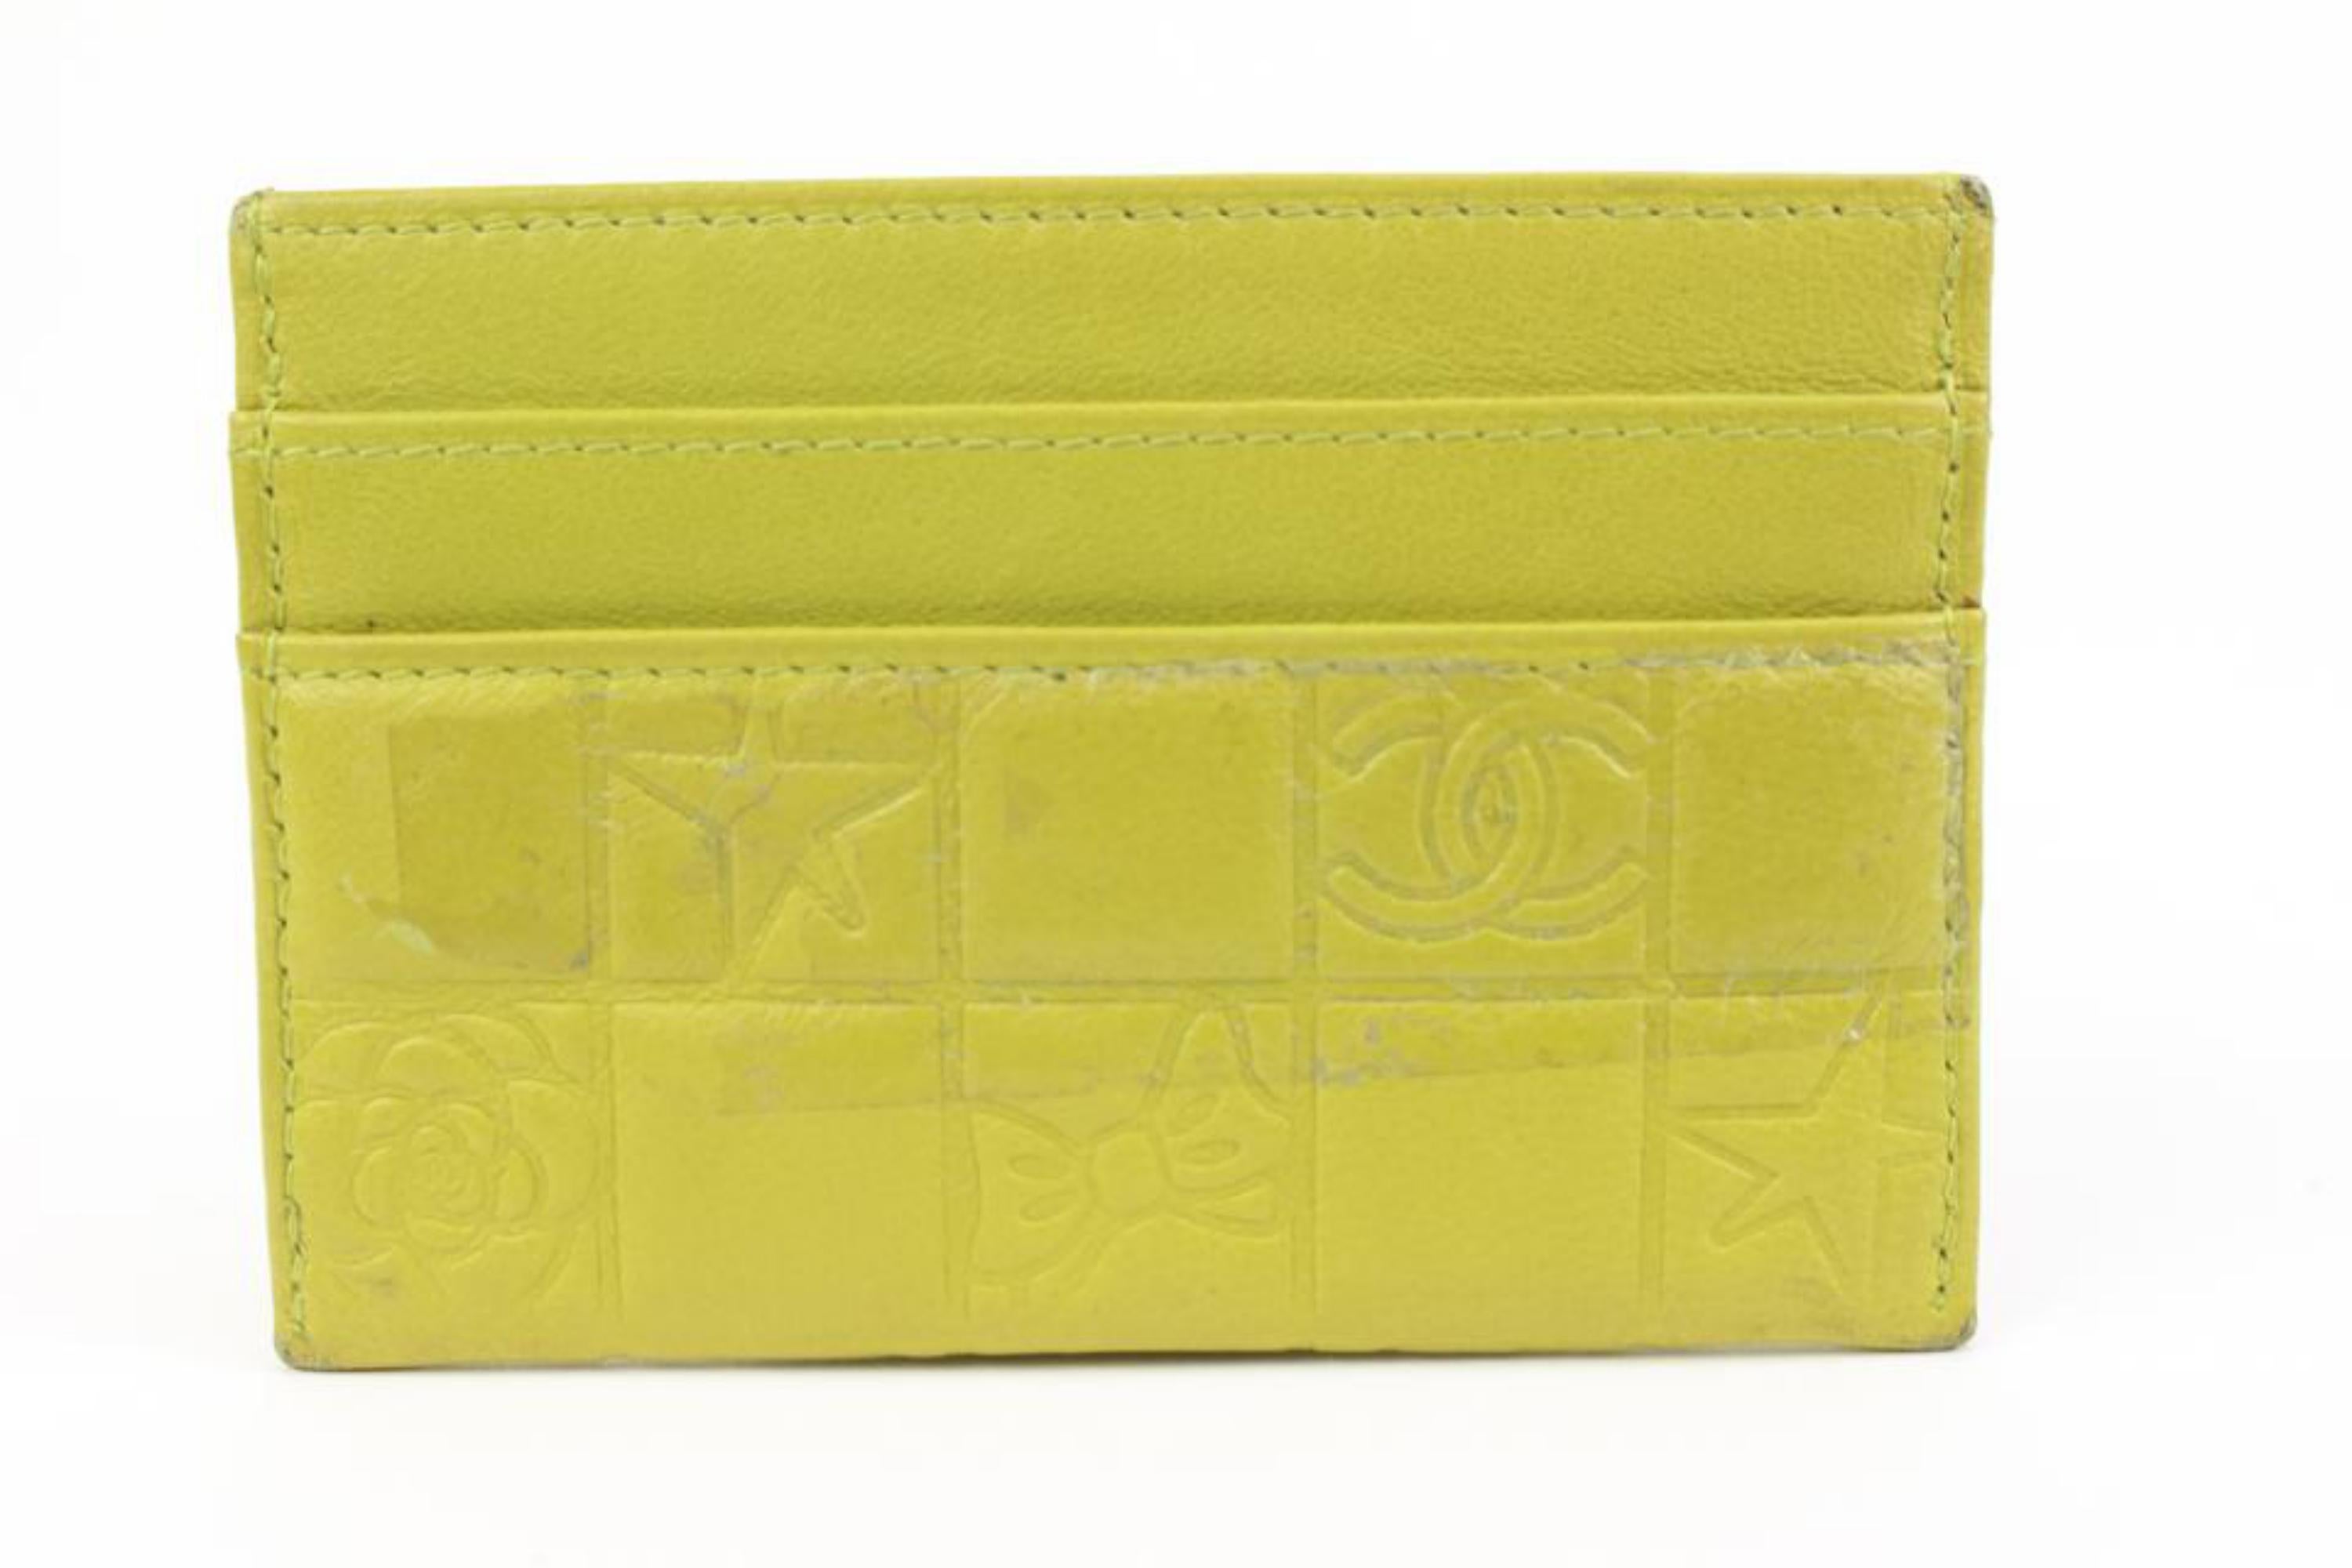 Chanel Lime Green Quilted Chocolate Bar Card Holder Wallet Case 52ck322s For Sale 3